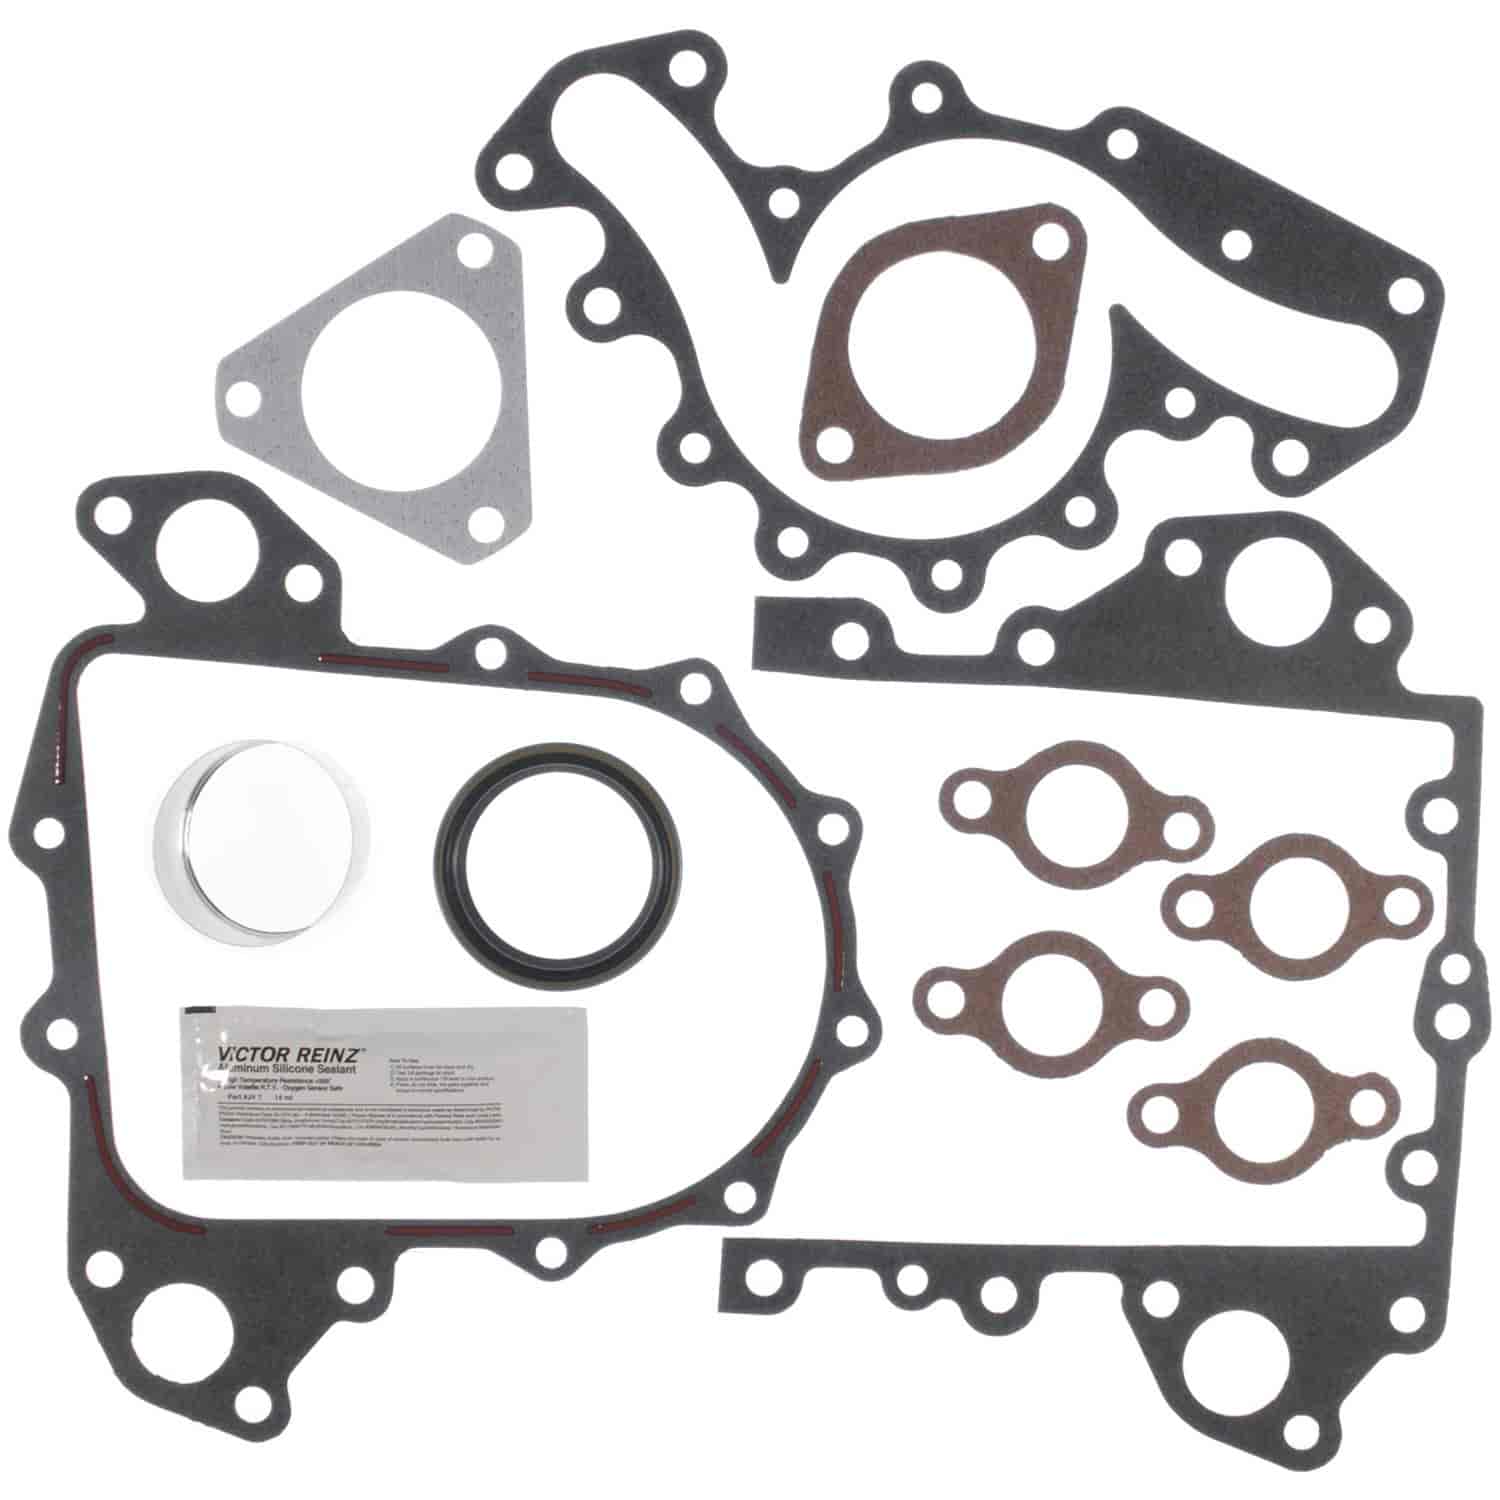 Timing Cover Set Chev-Trk GMC 6.2L Diesel Eng 82-90 Contains Repair Sleeve Option To JV971